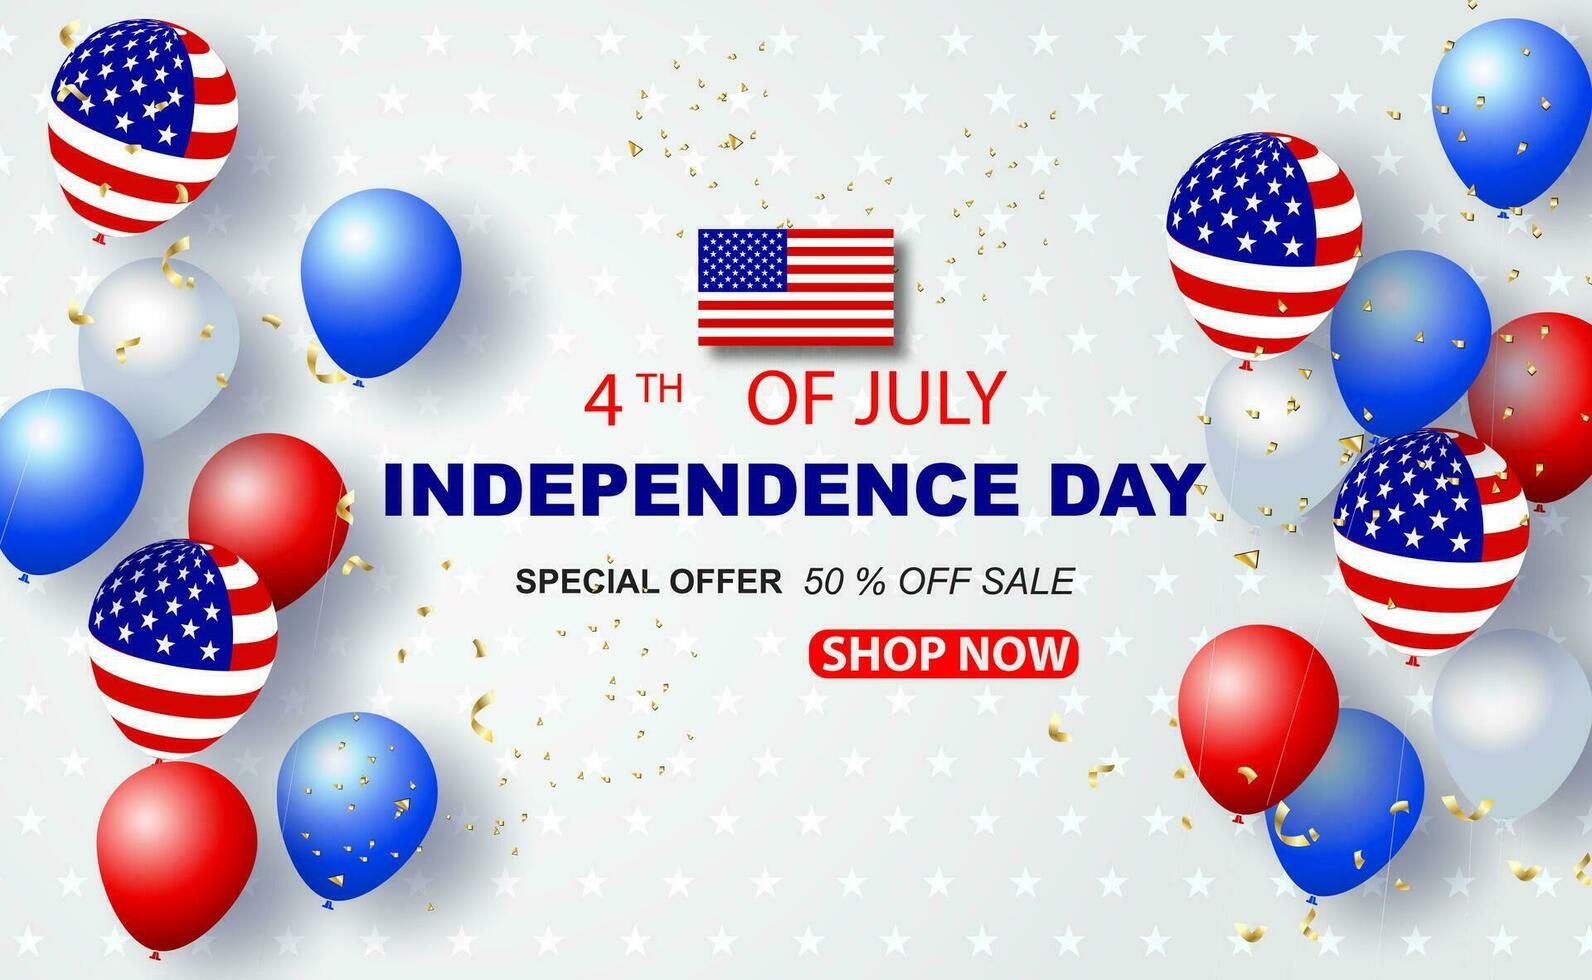 Balloons of USA American 4th of July background. Happy Independence day Banner holiday in United States of America. Celebration element national. Festival Sale Special offer banner Shopping online vector